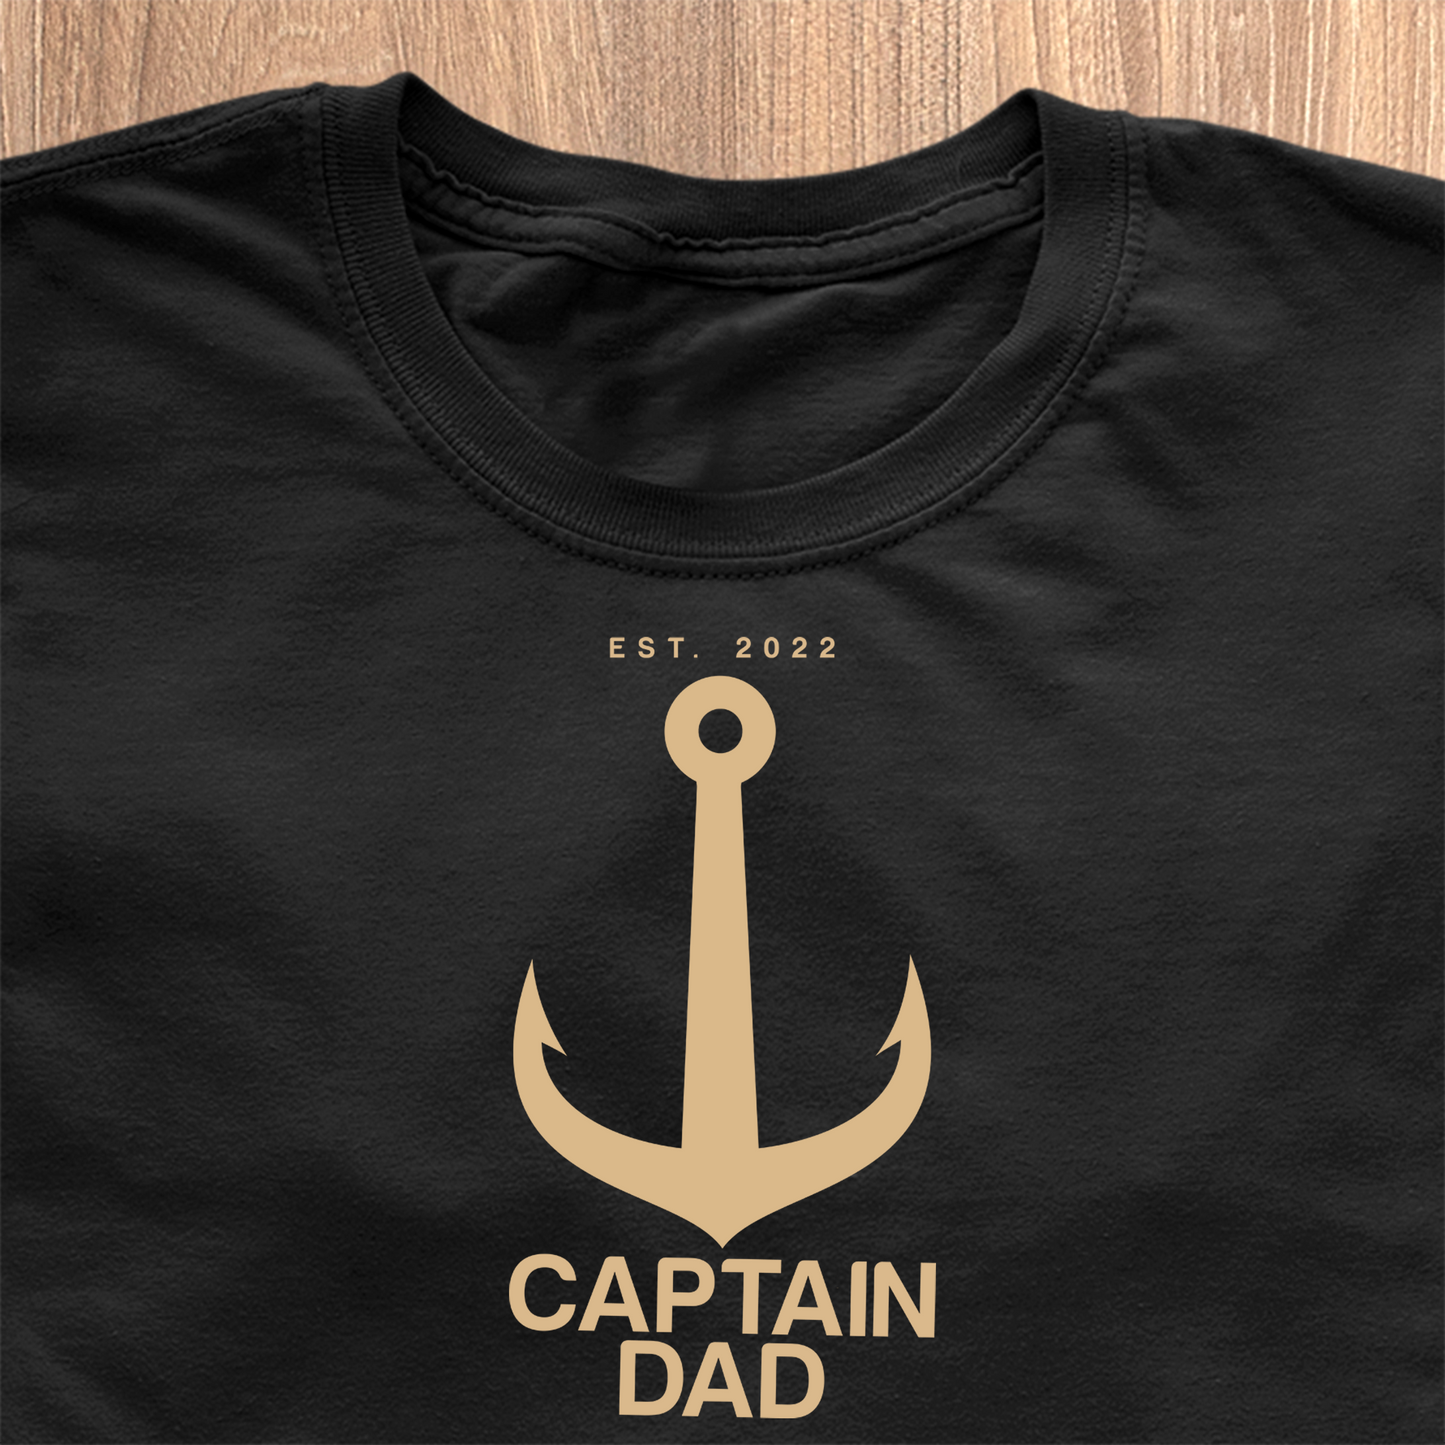 Captain Dad T-Shirt - Date Personalised